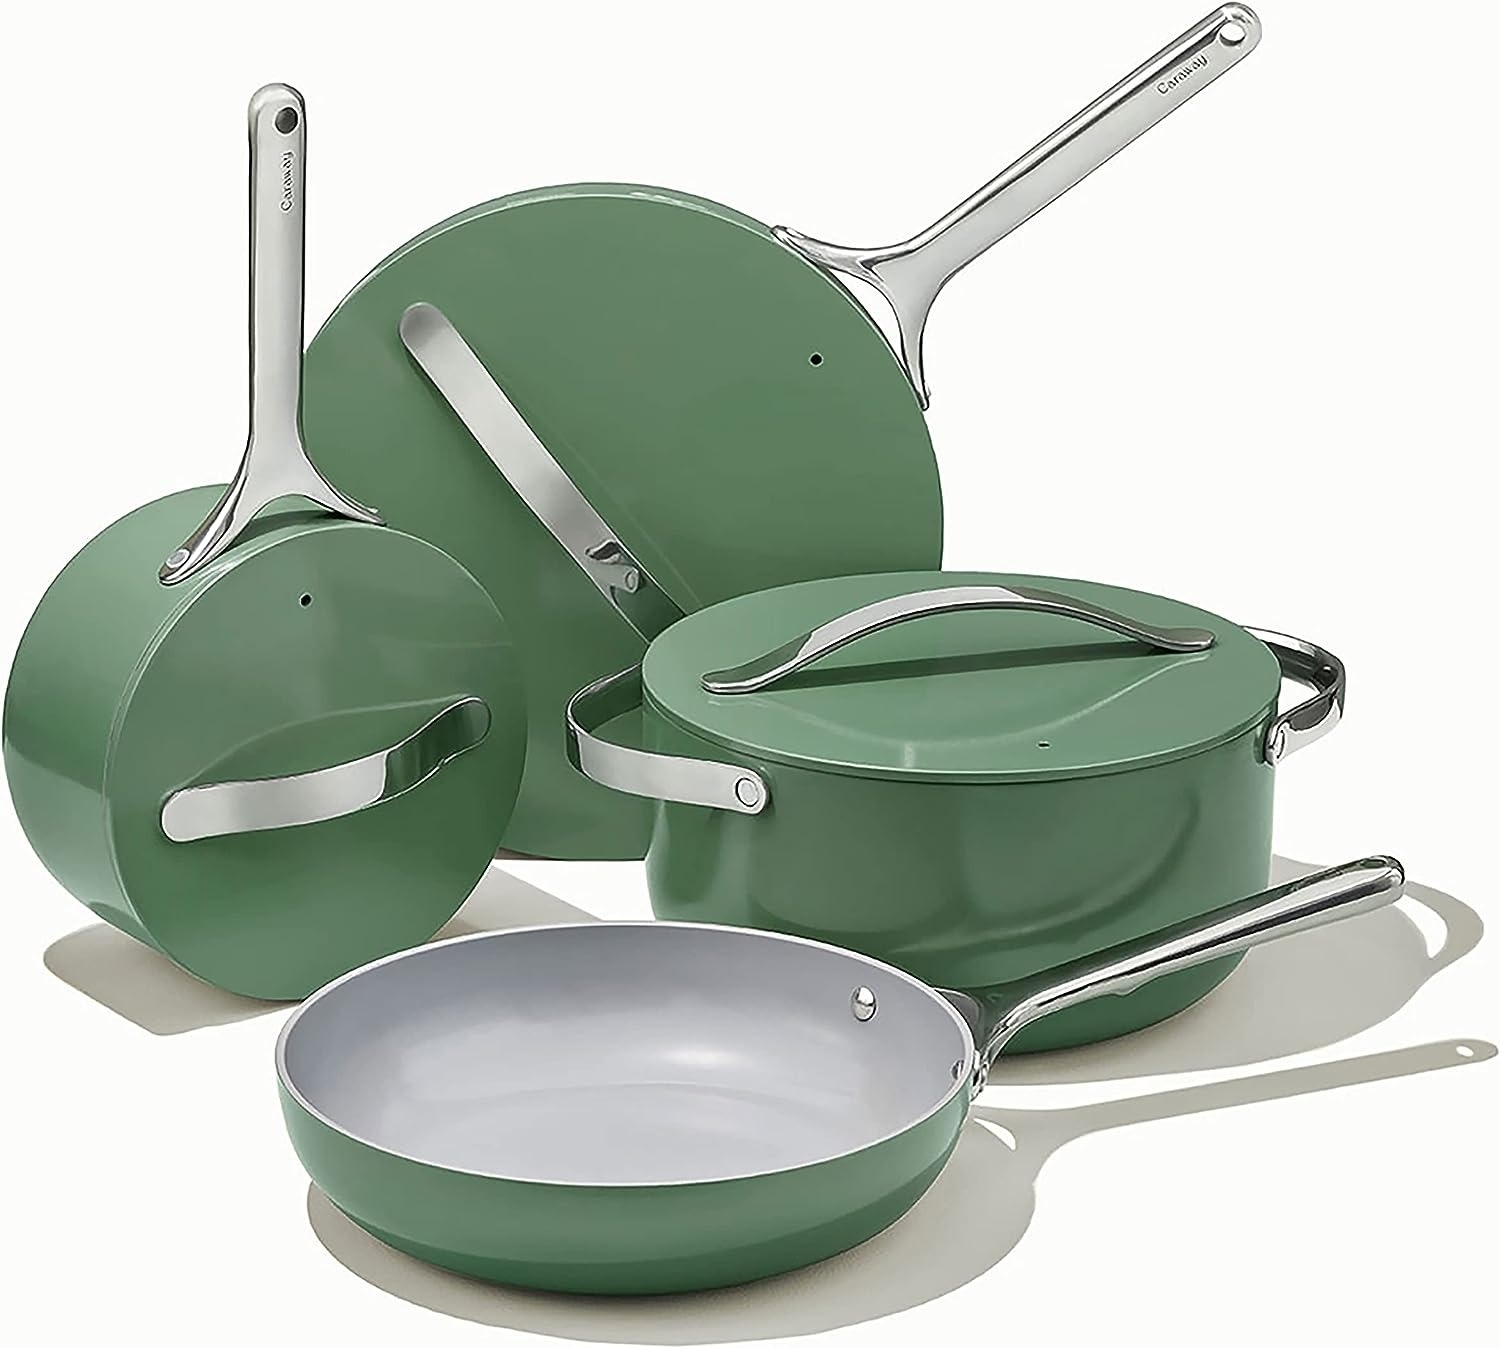 the whole set of cookware